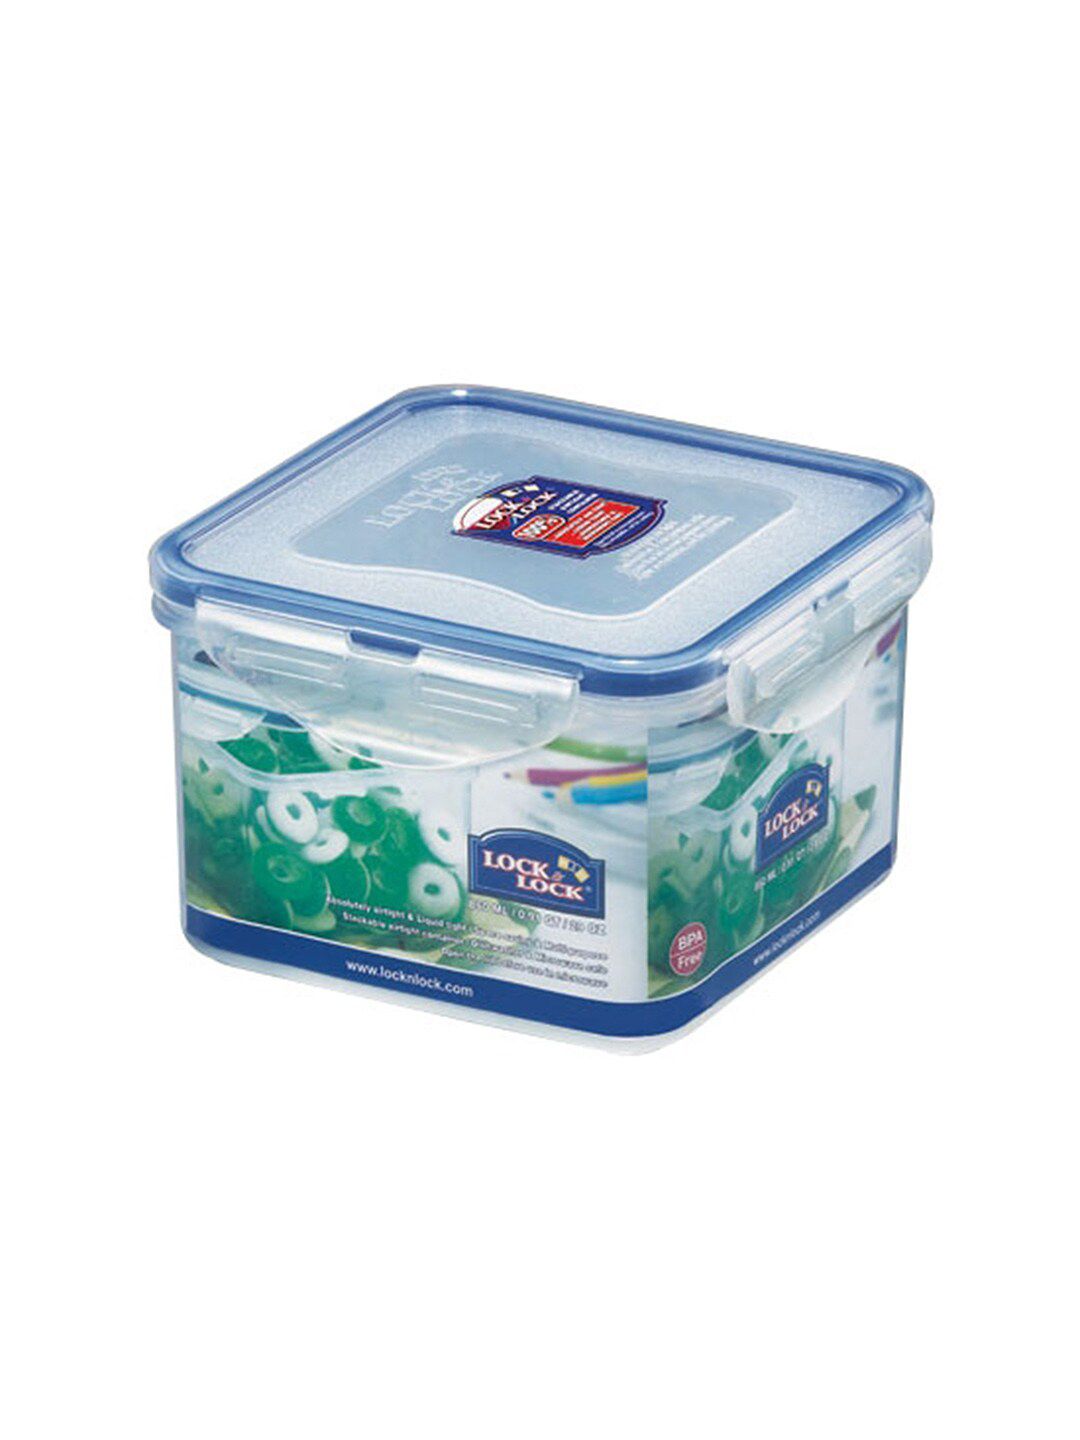 Lock & Lock Transparent & Blue Solid Airtight Food Storage Container With Lid Price in India